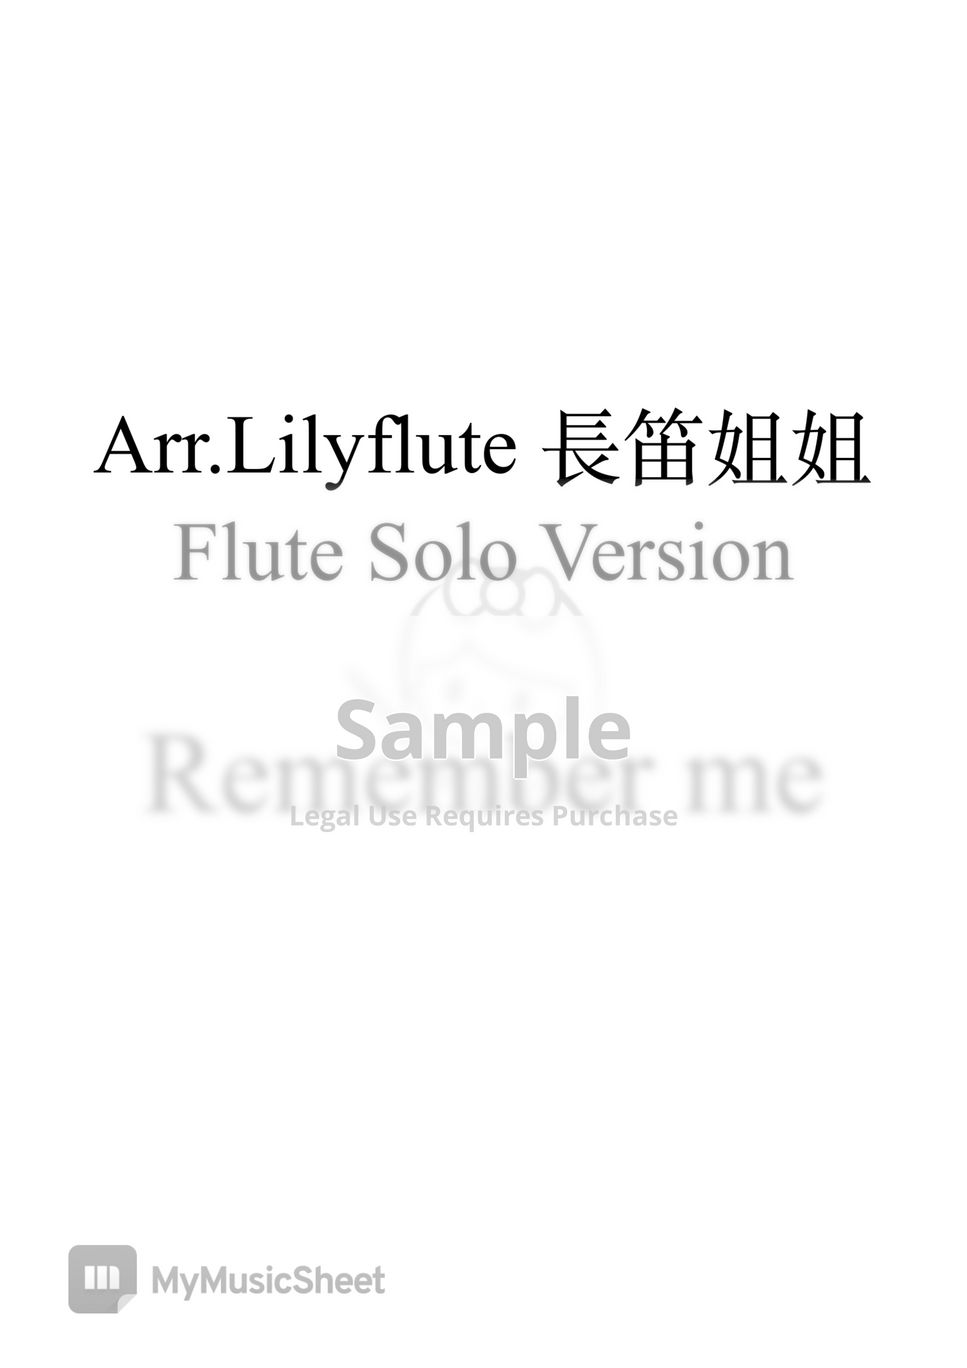 Remember Me - Medley From "Coco" by Lily Flute長笛姐姐